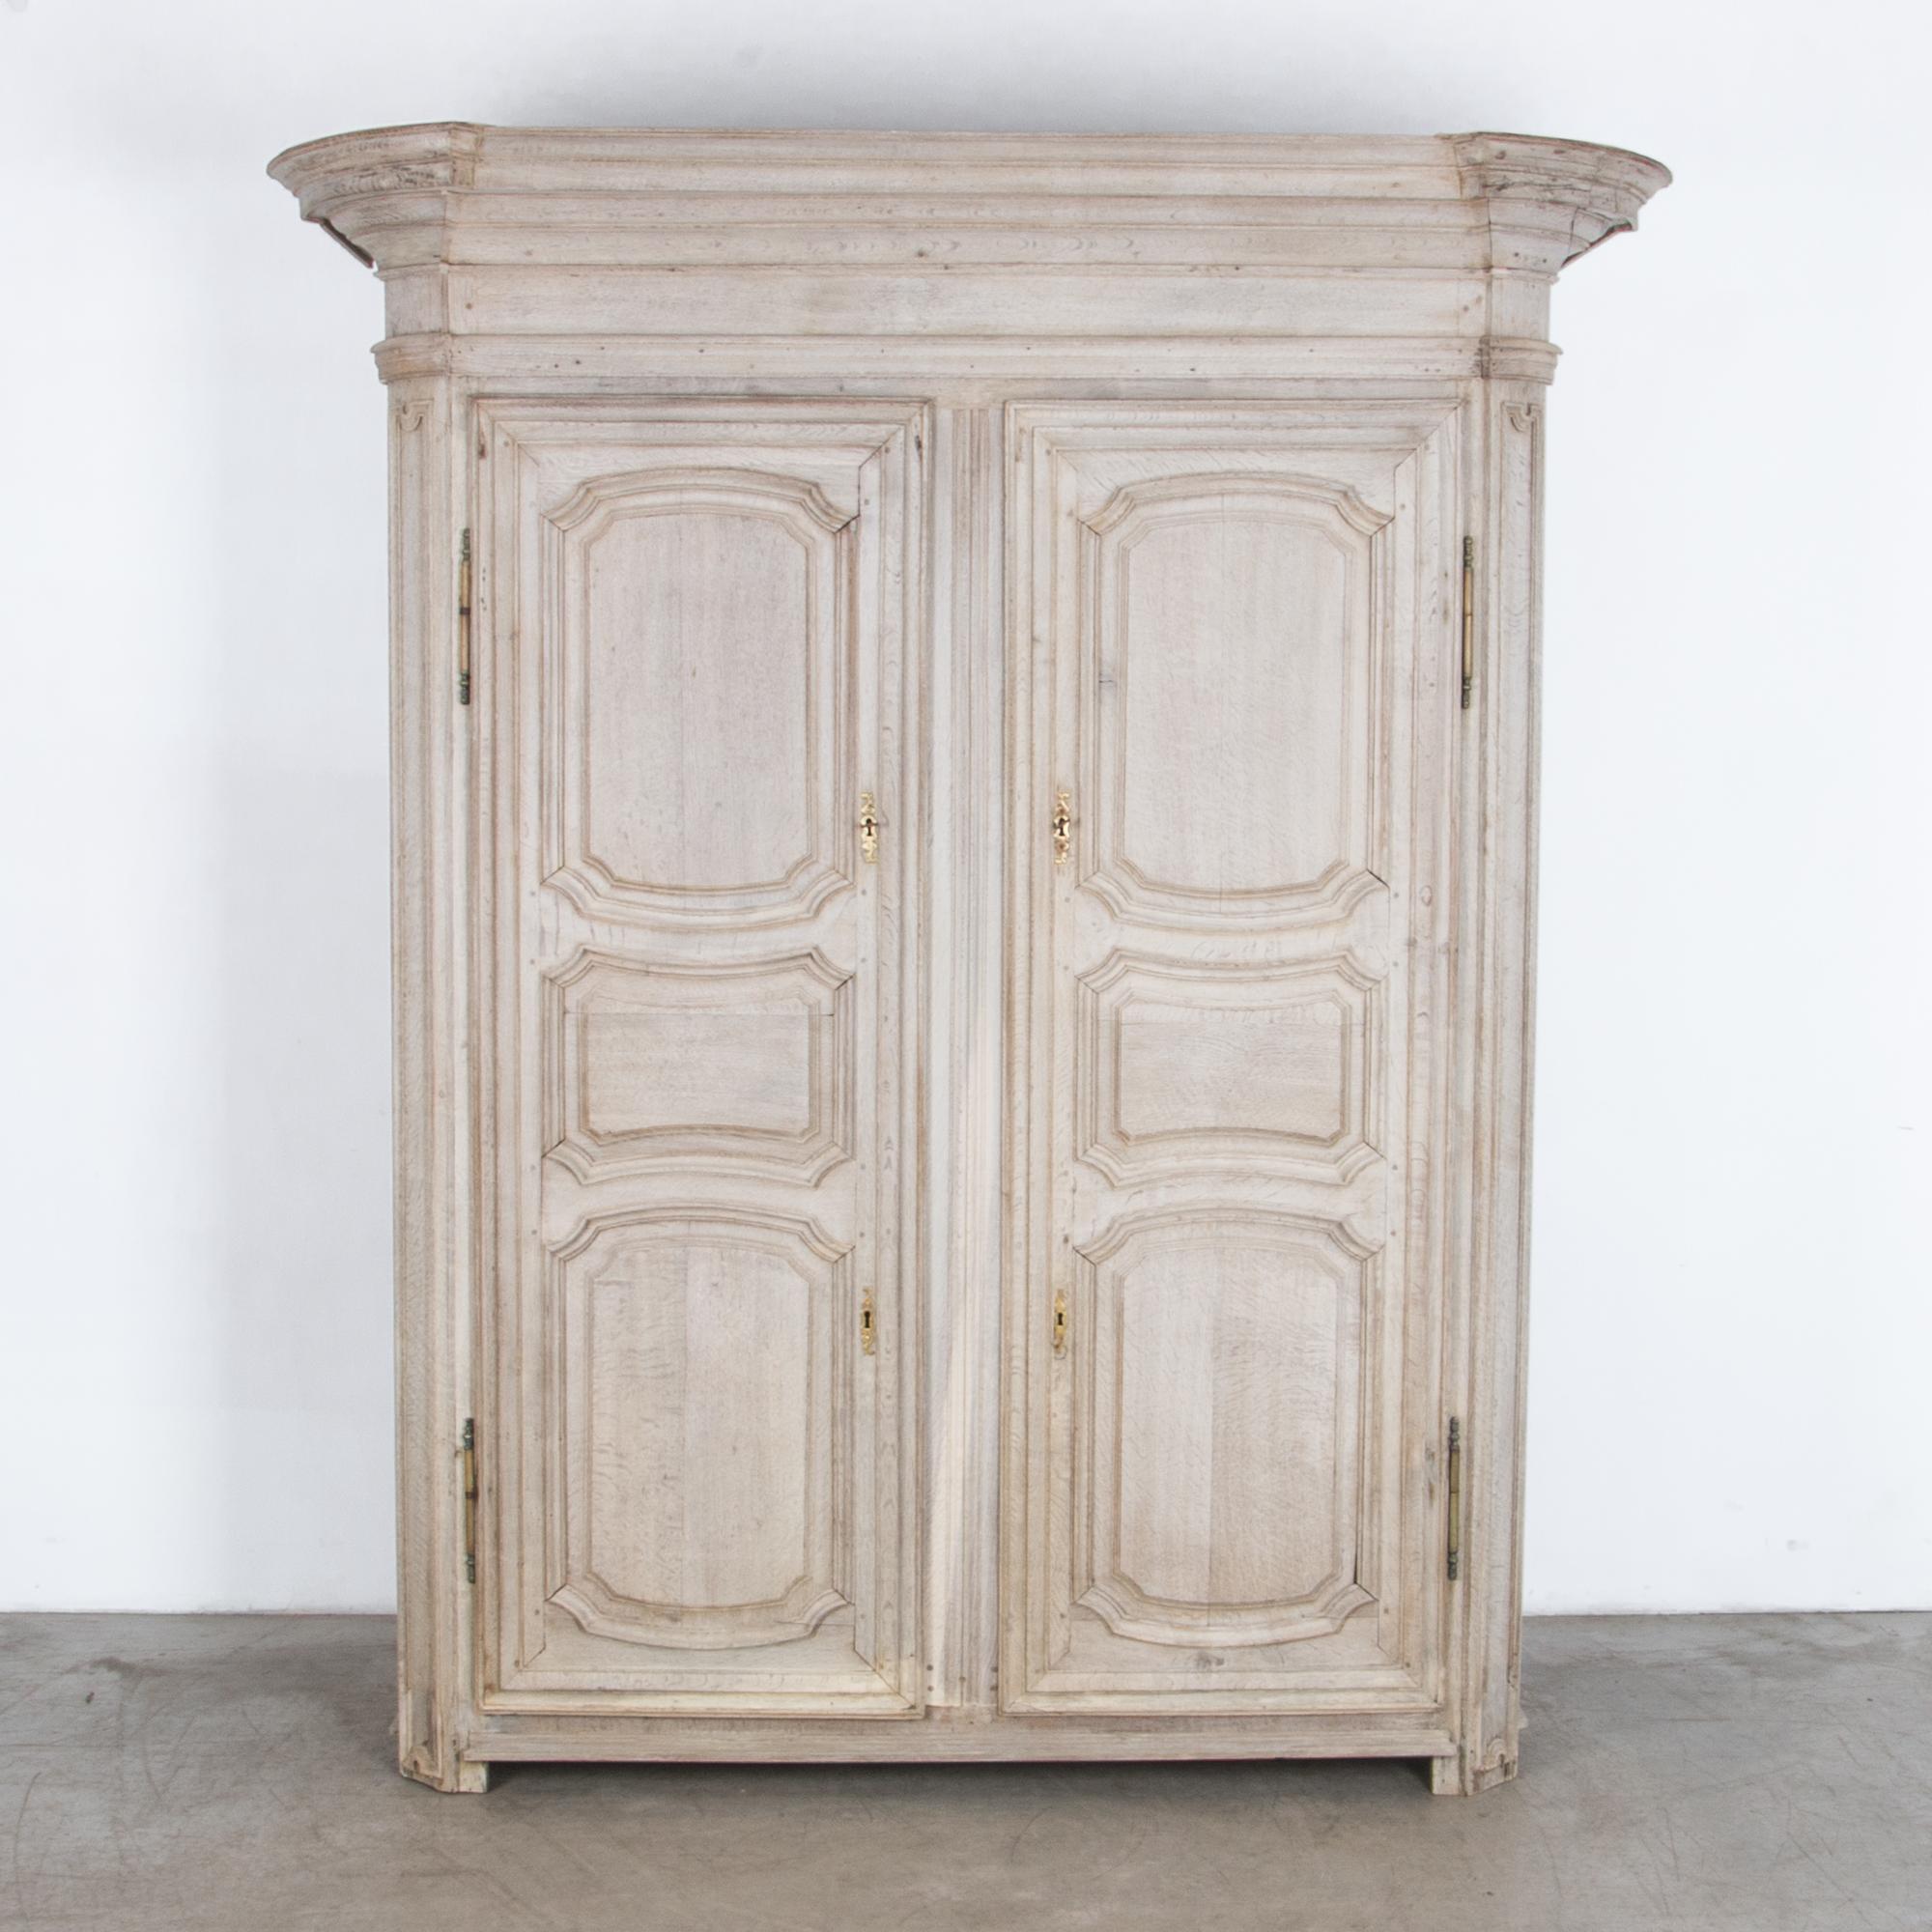 Time tested traditional craftsmanship, with distinctive cold growth oak in a rustic neutral finish and original brass hardware. A practical and beautiful storage piece with interior shelving and impressive moulding elements. This elegant wardrobe is